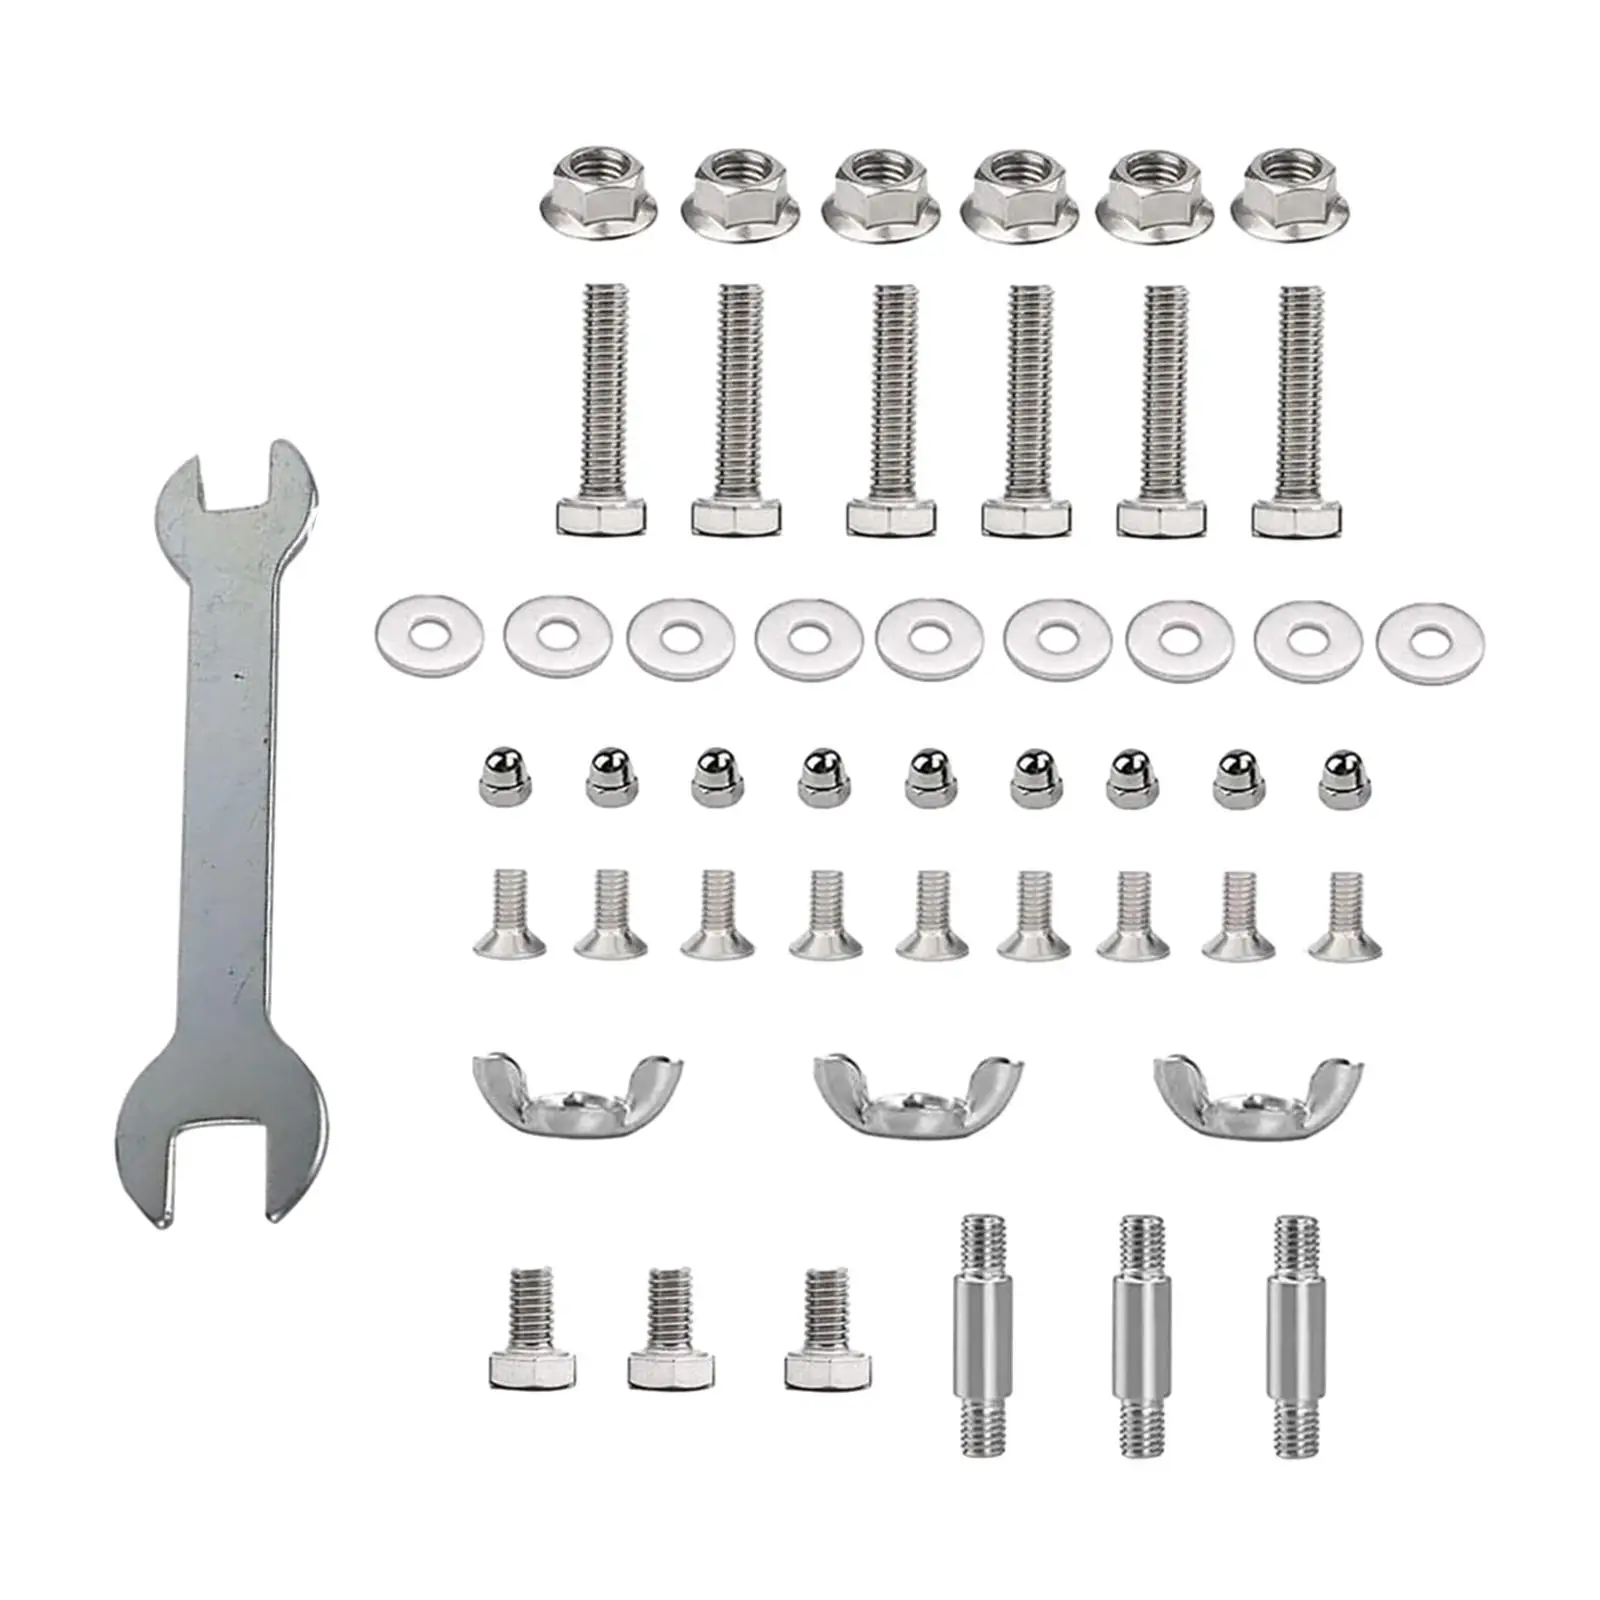 Outdoor Garden Patio Heater Hardware Screws Bolts Nuts Kit Durable with Wrench Professional Simple to Install Accessories